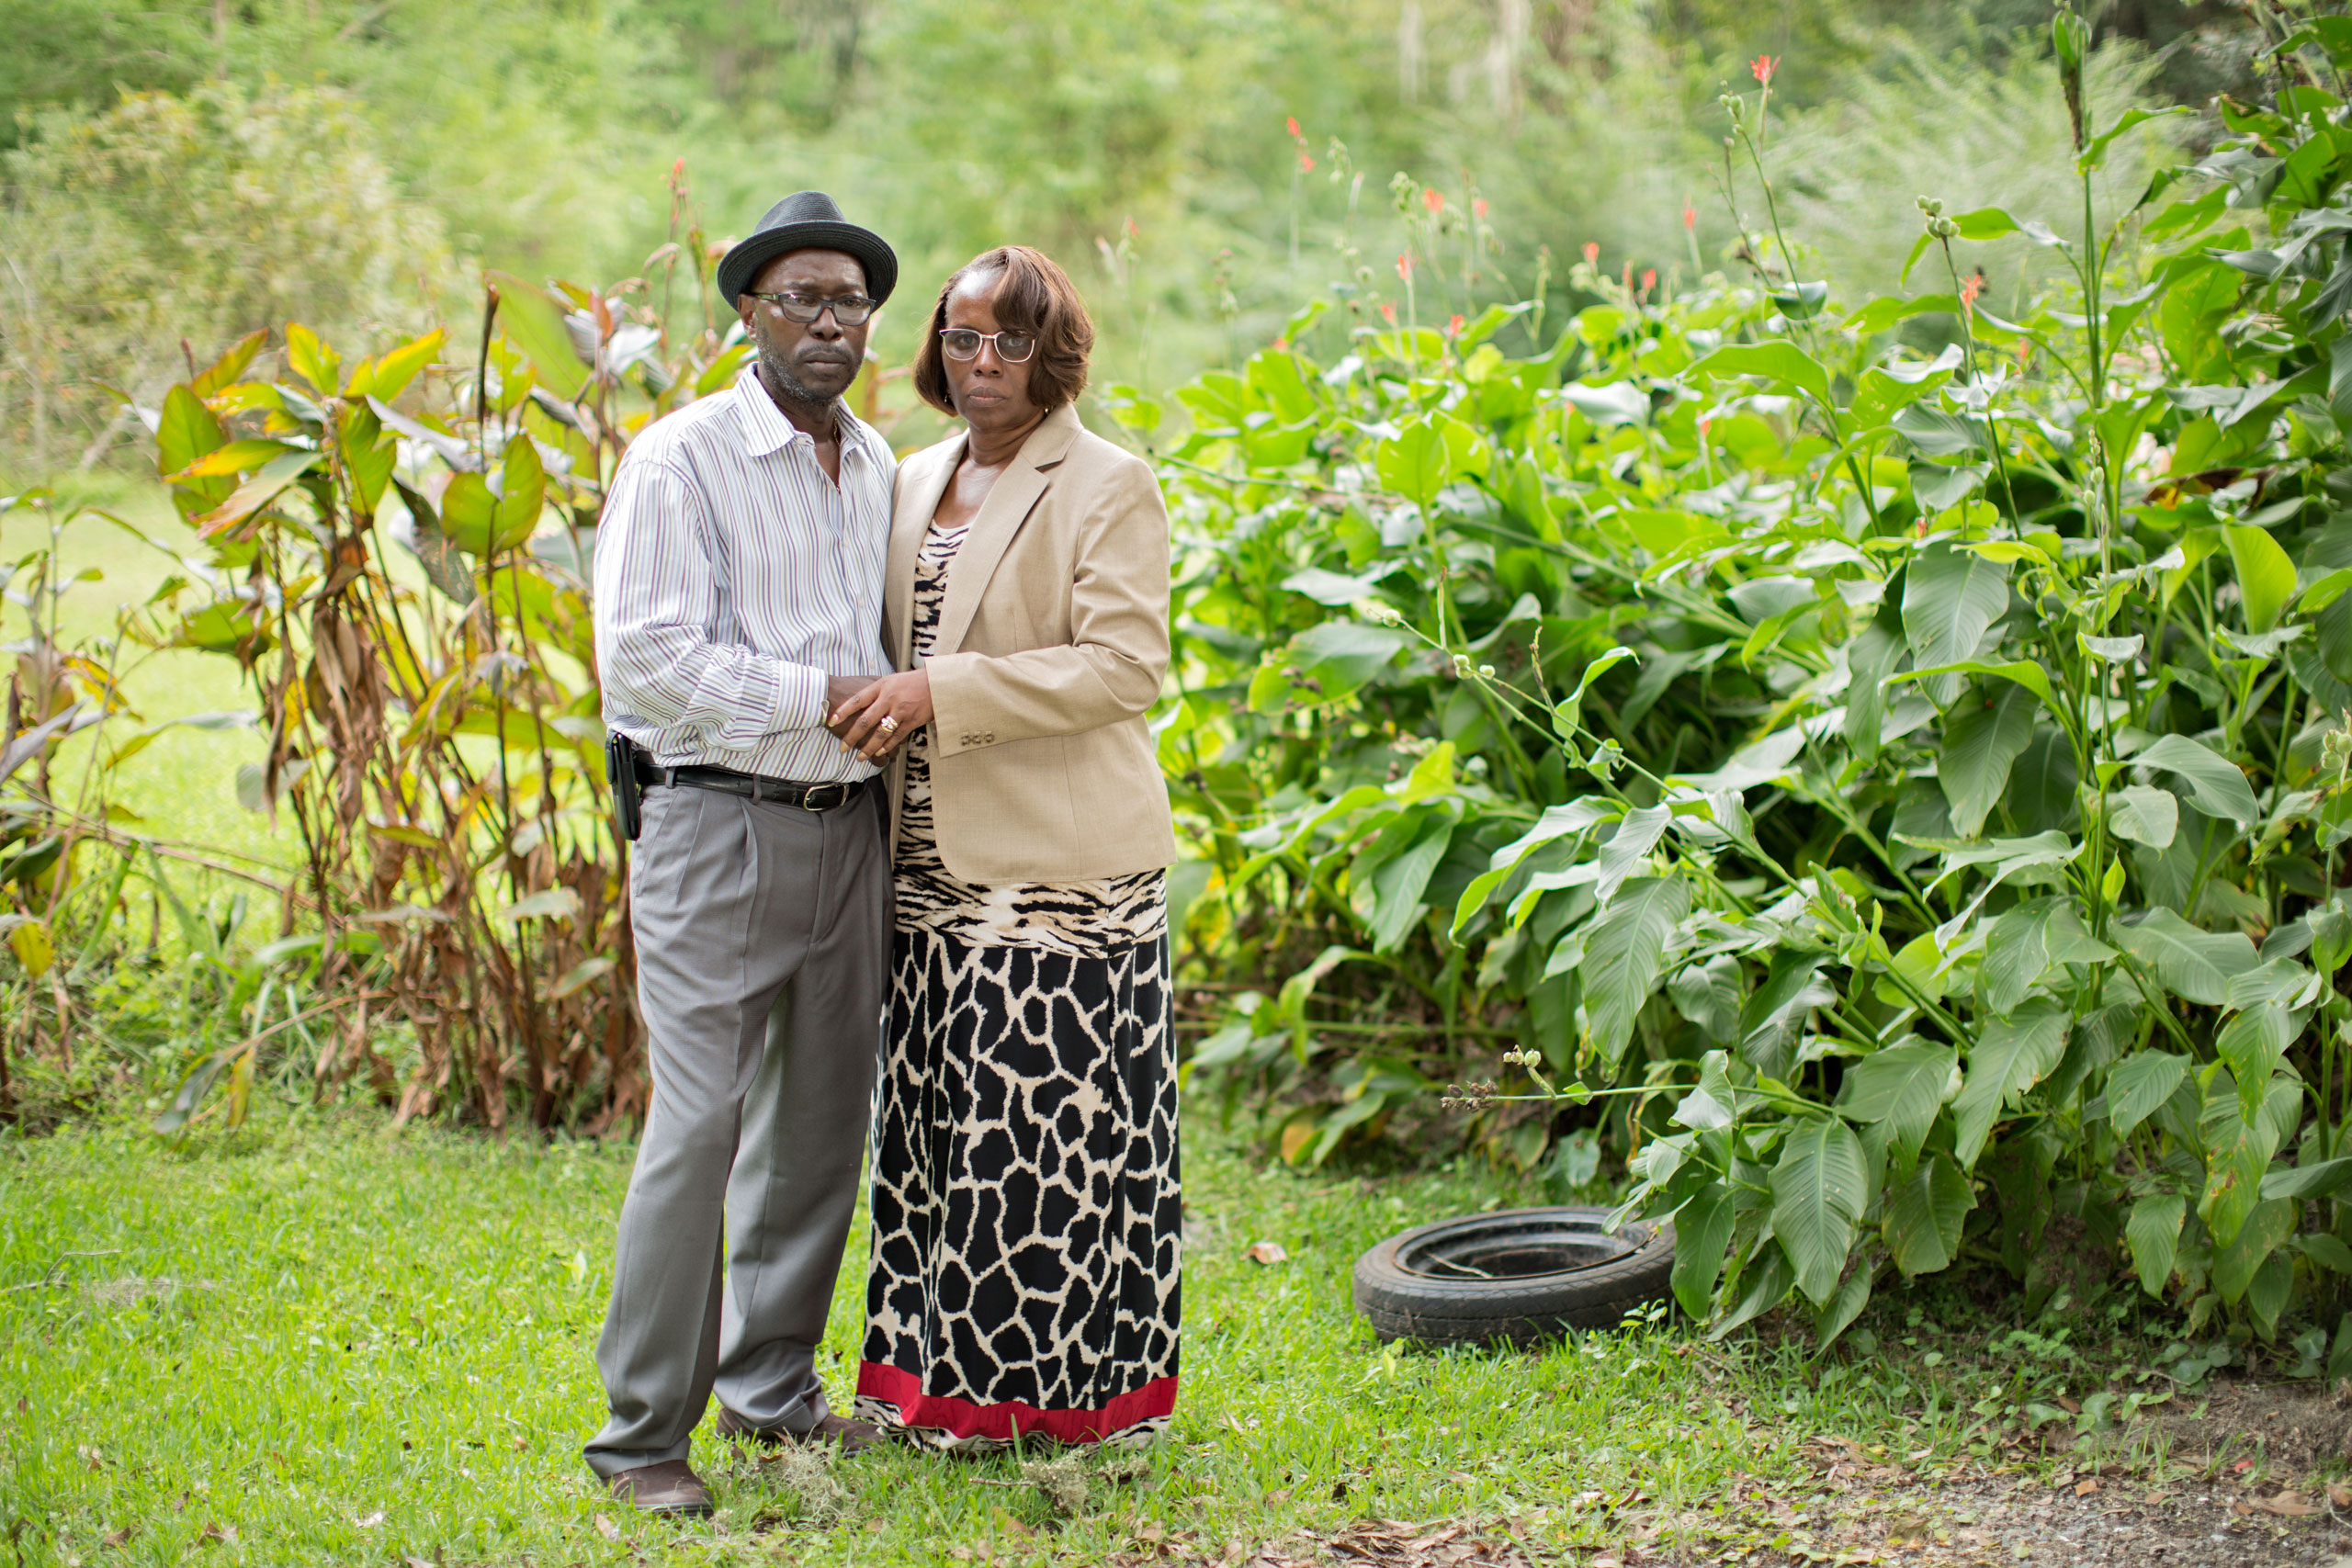 Tyrone and Felicia Sanders
                              
                              Tywanza Sanders parents, photographed at their home in Charleston